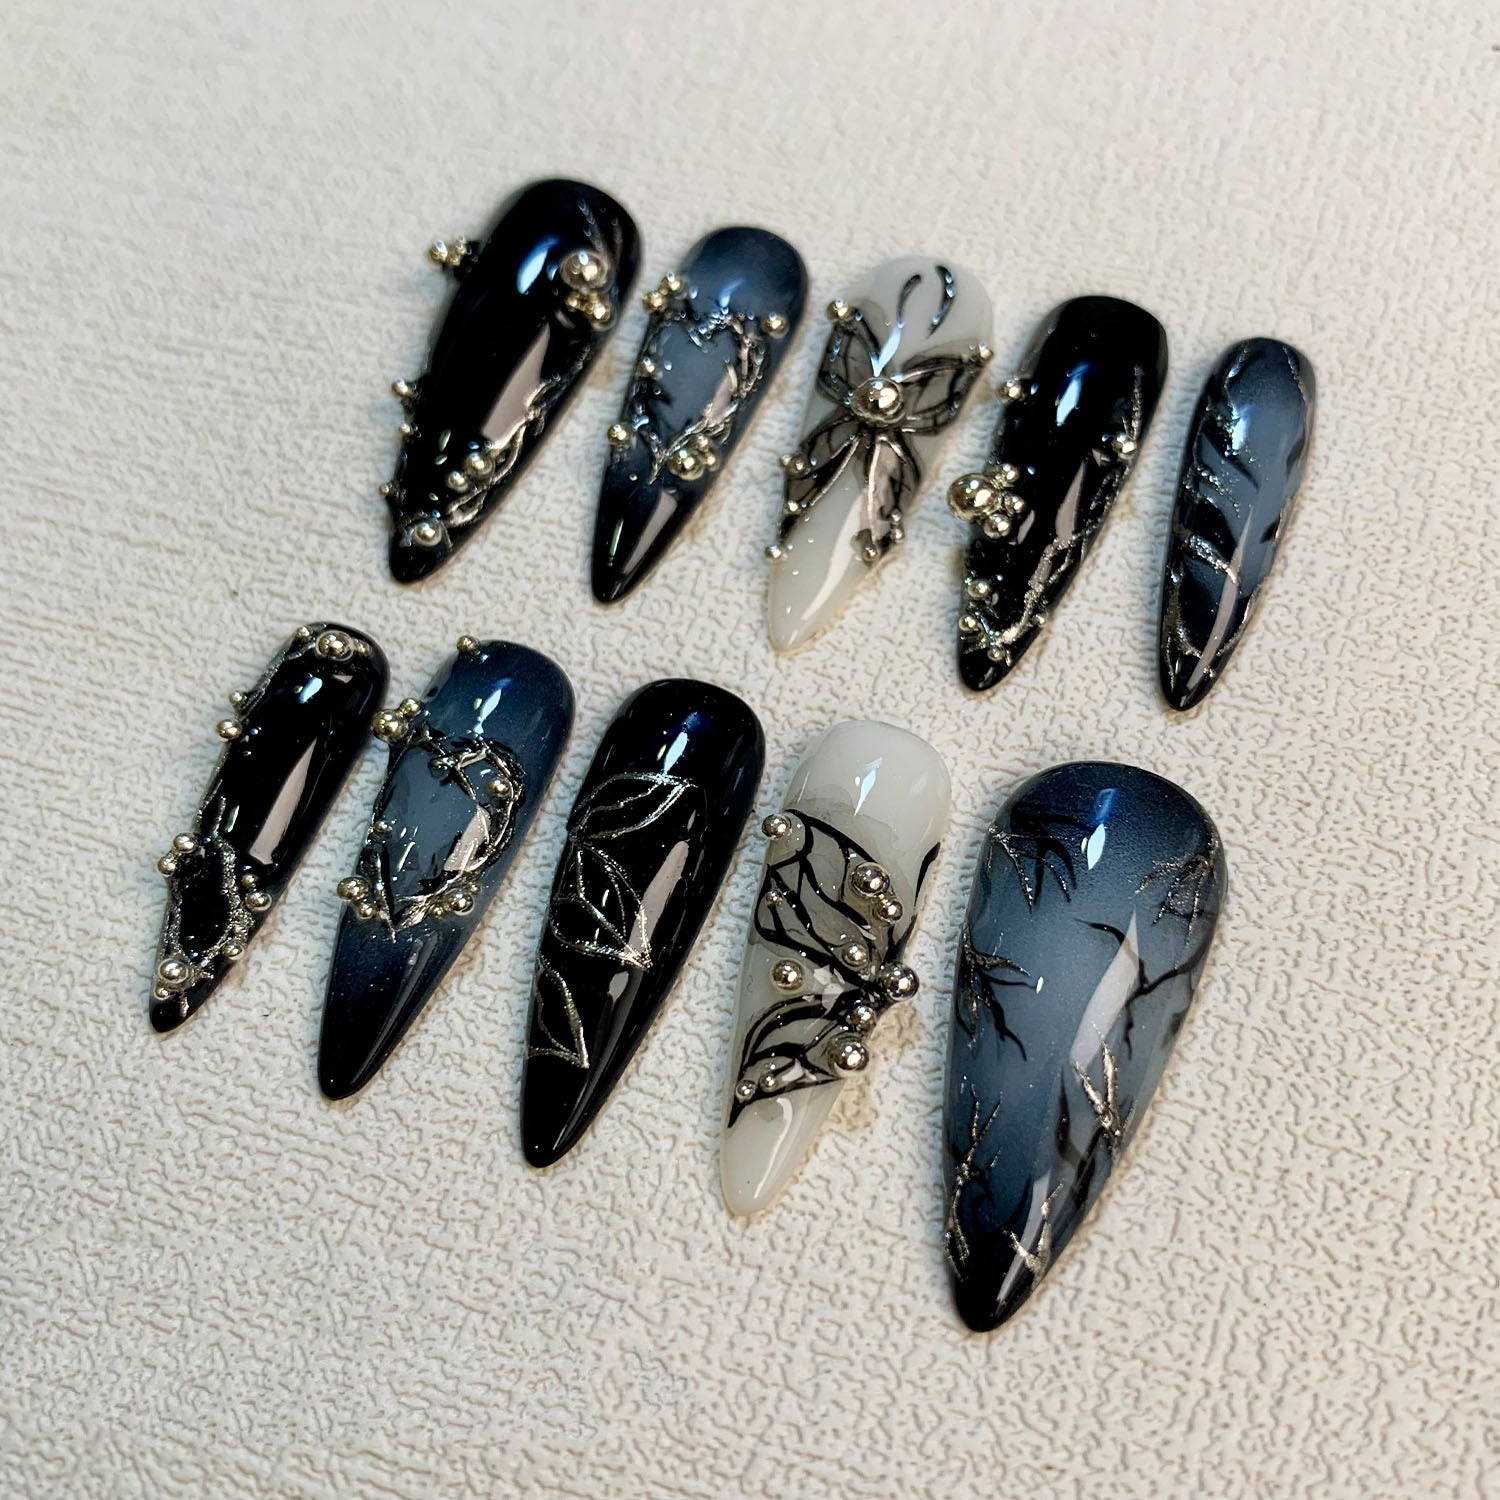 Custom Black Butterfly Press On Nails, Gothic Punk Rock Nails, Goth Butterflies Y2K Fake Nails